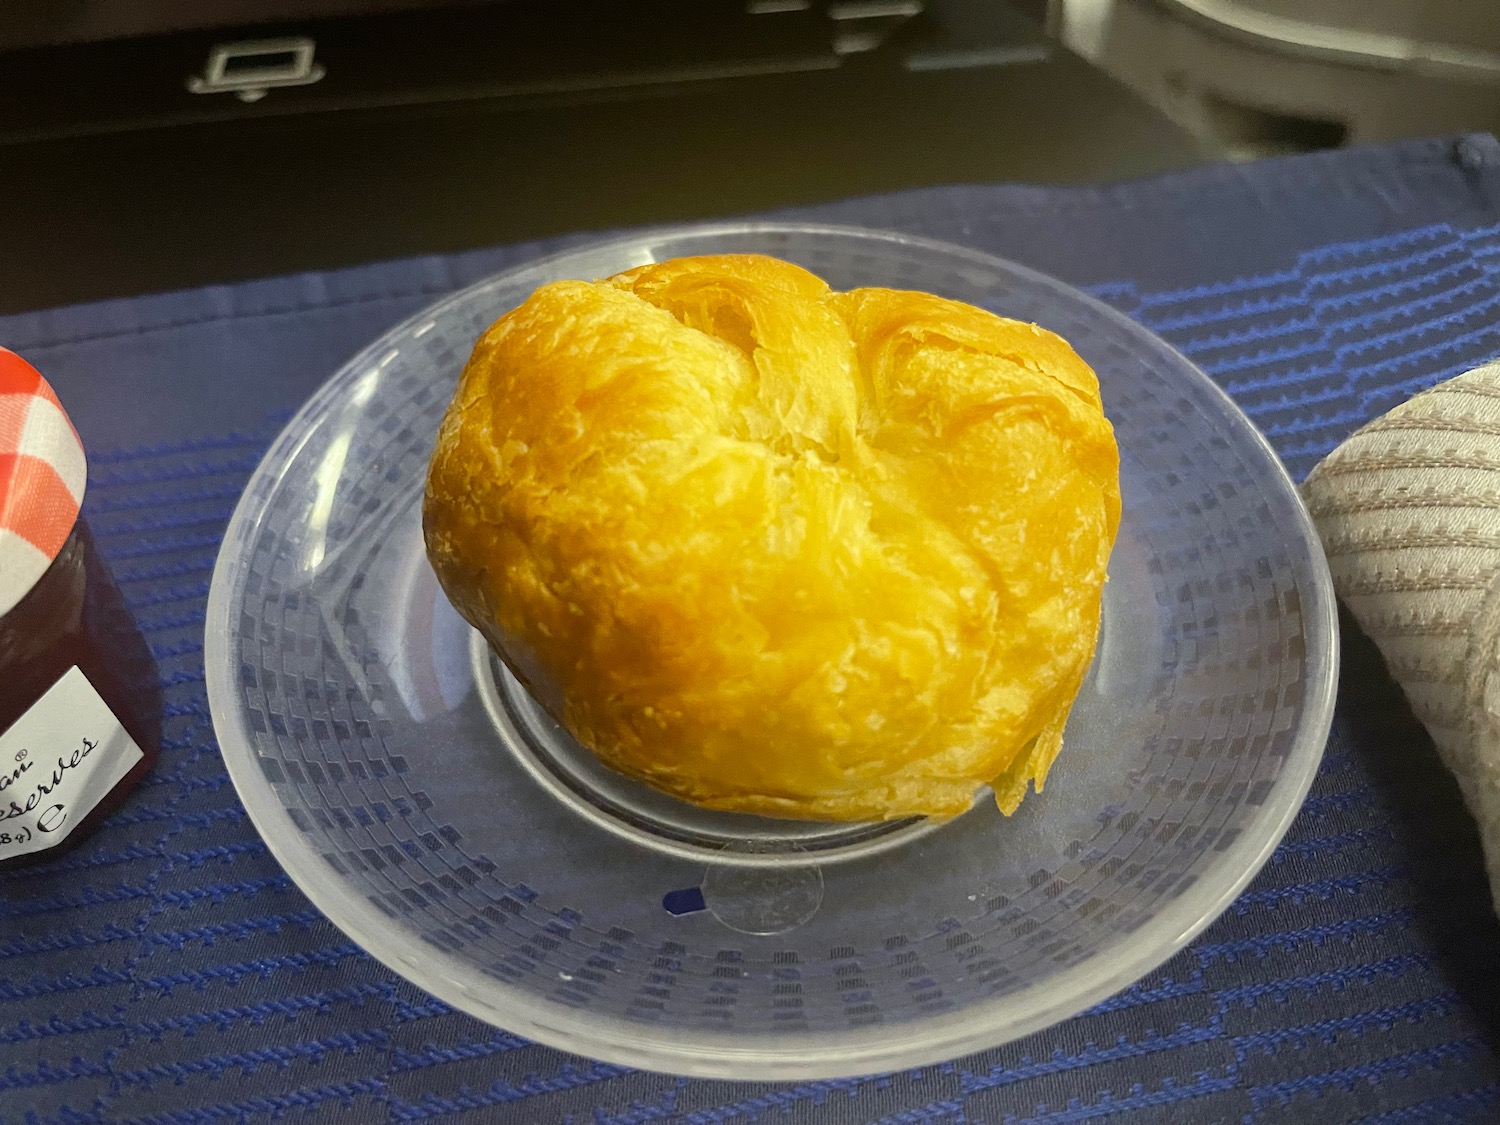 a pastry on a plate